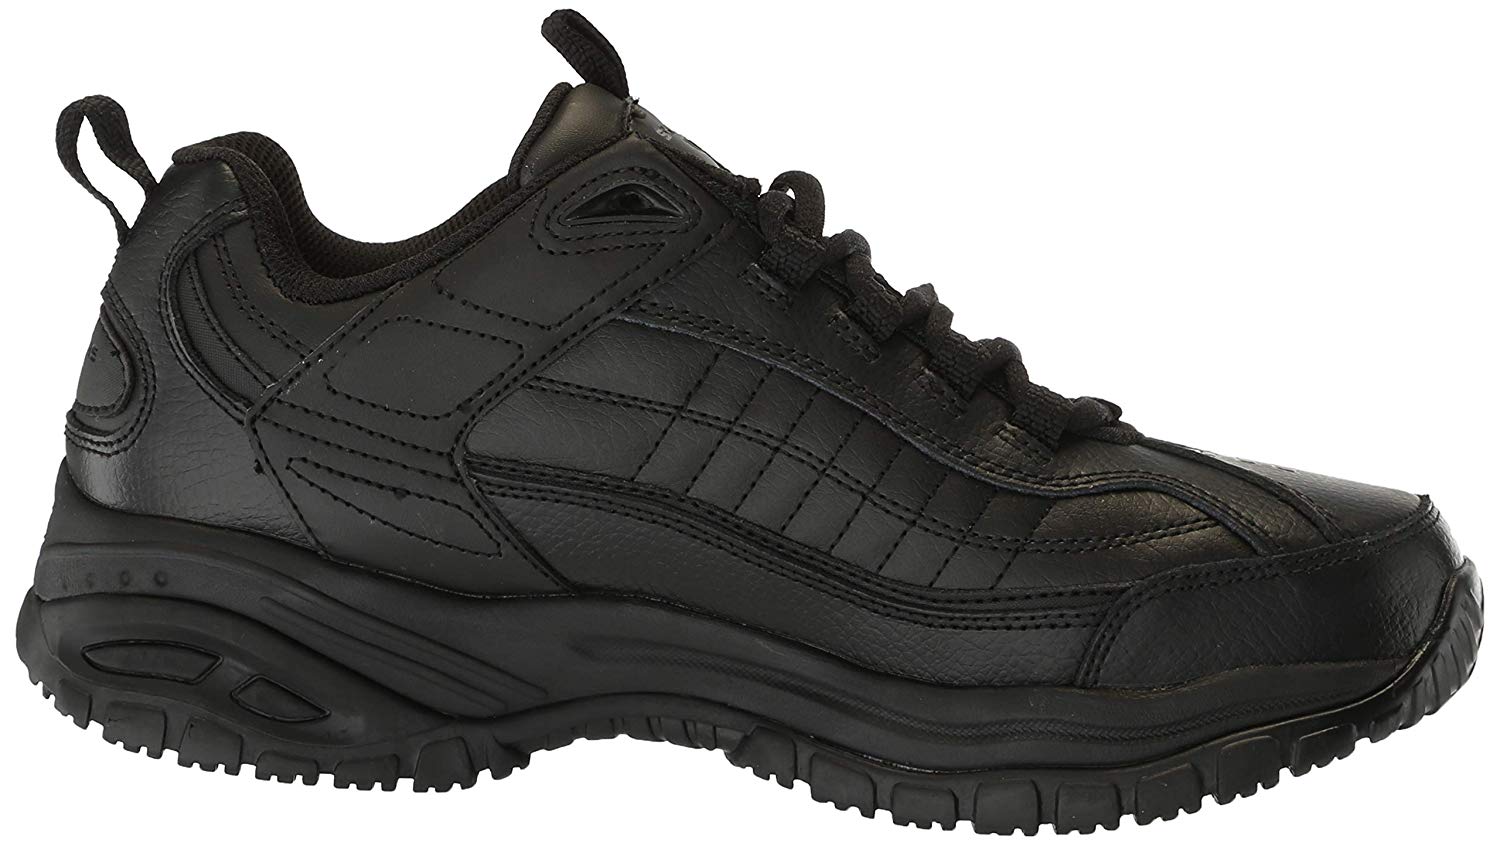 Skechers Mens 76759EW Leather Steel toe Lace Up Safety Shoes, Black ...